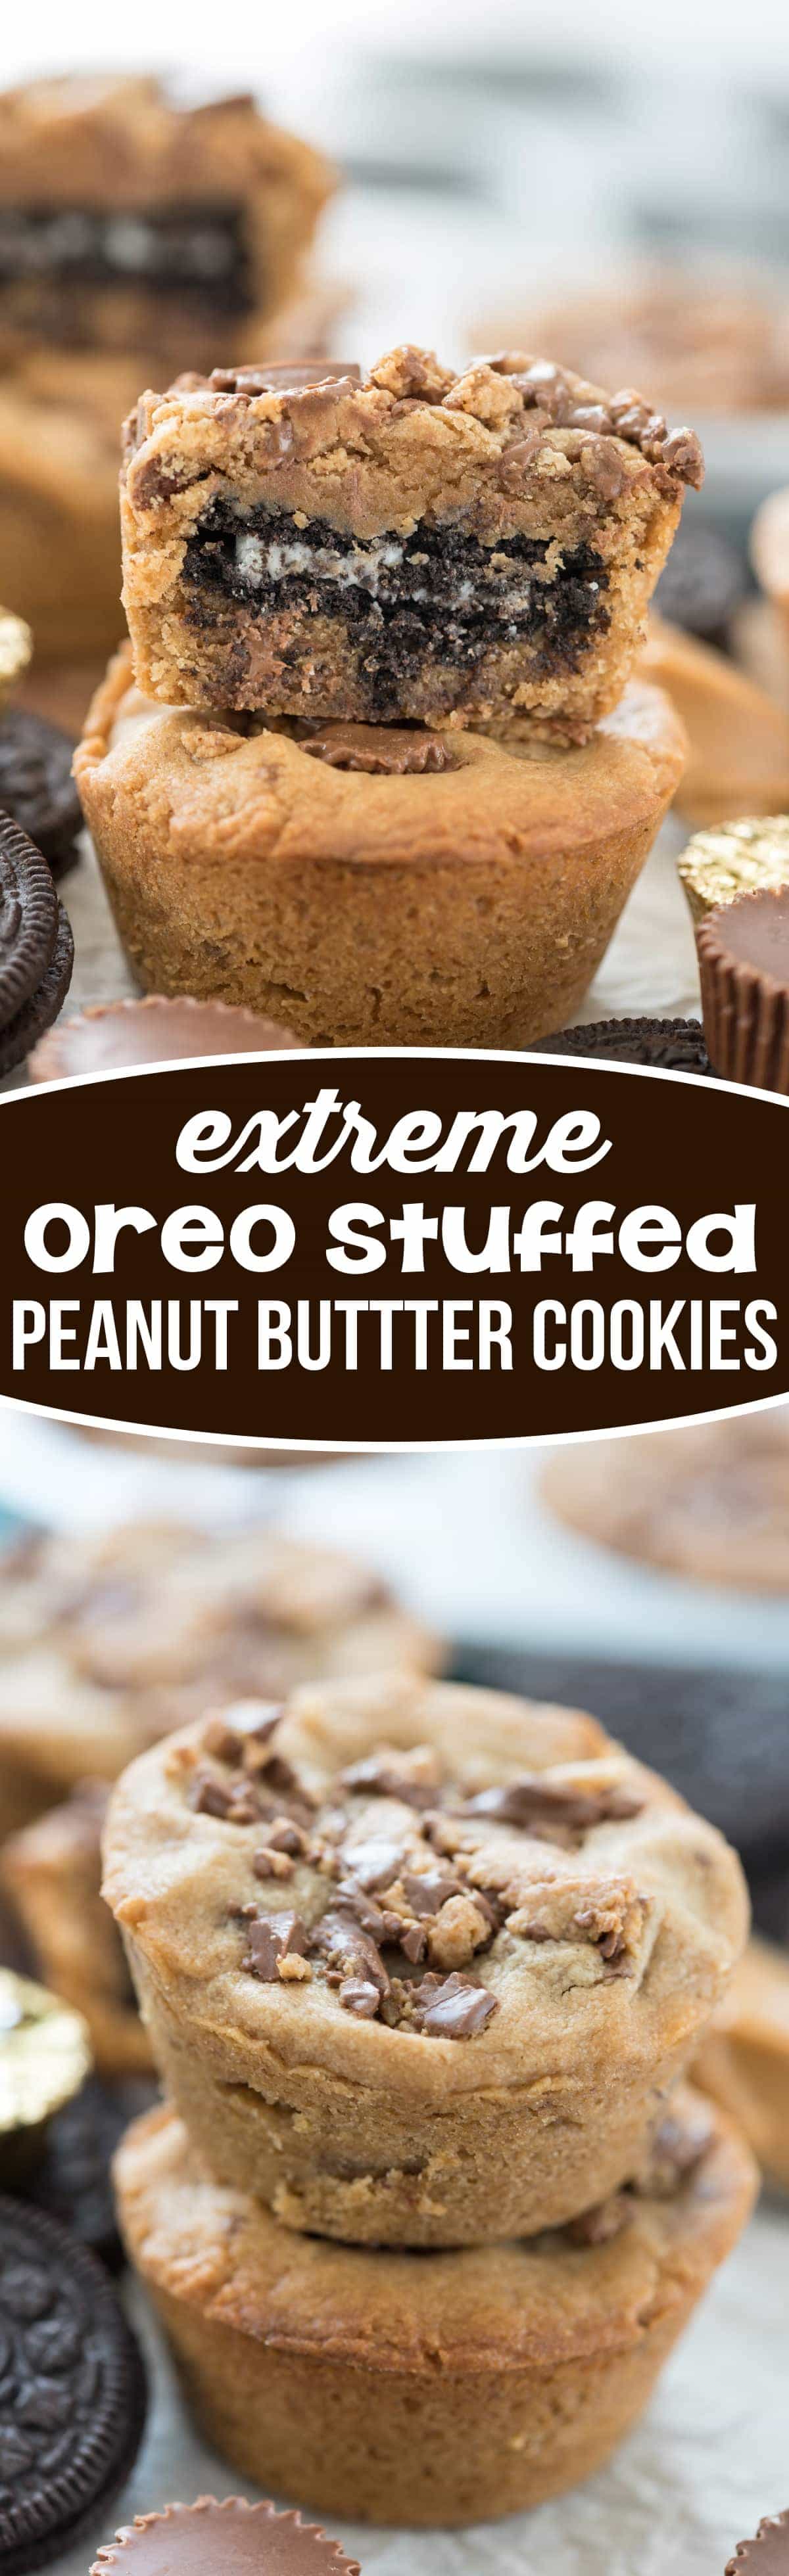 Extreme Oreo Stuffed Peanut Butter Cookies - easy cookies stuffed with OREOS and peanut butter cups!